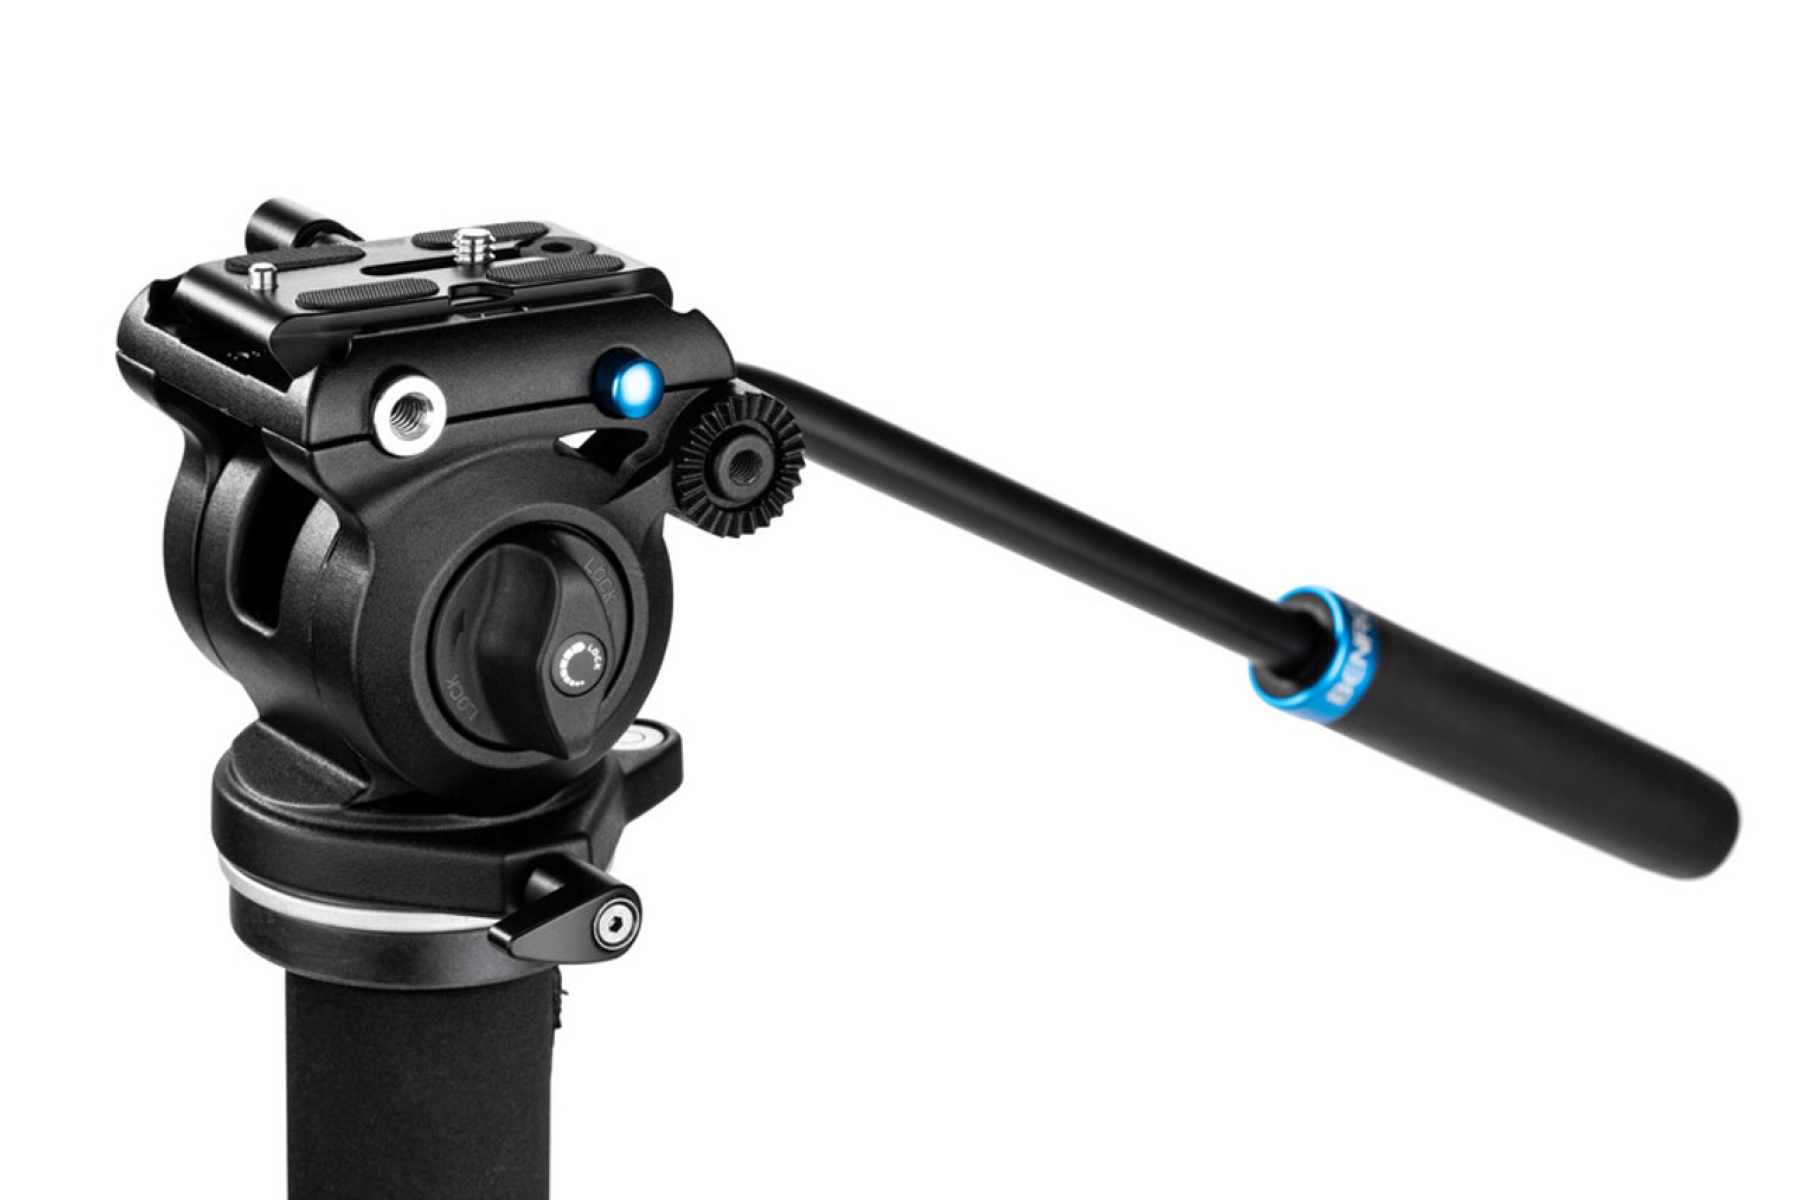 Choosing The Right Head For Your Monopod